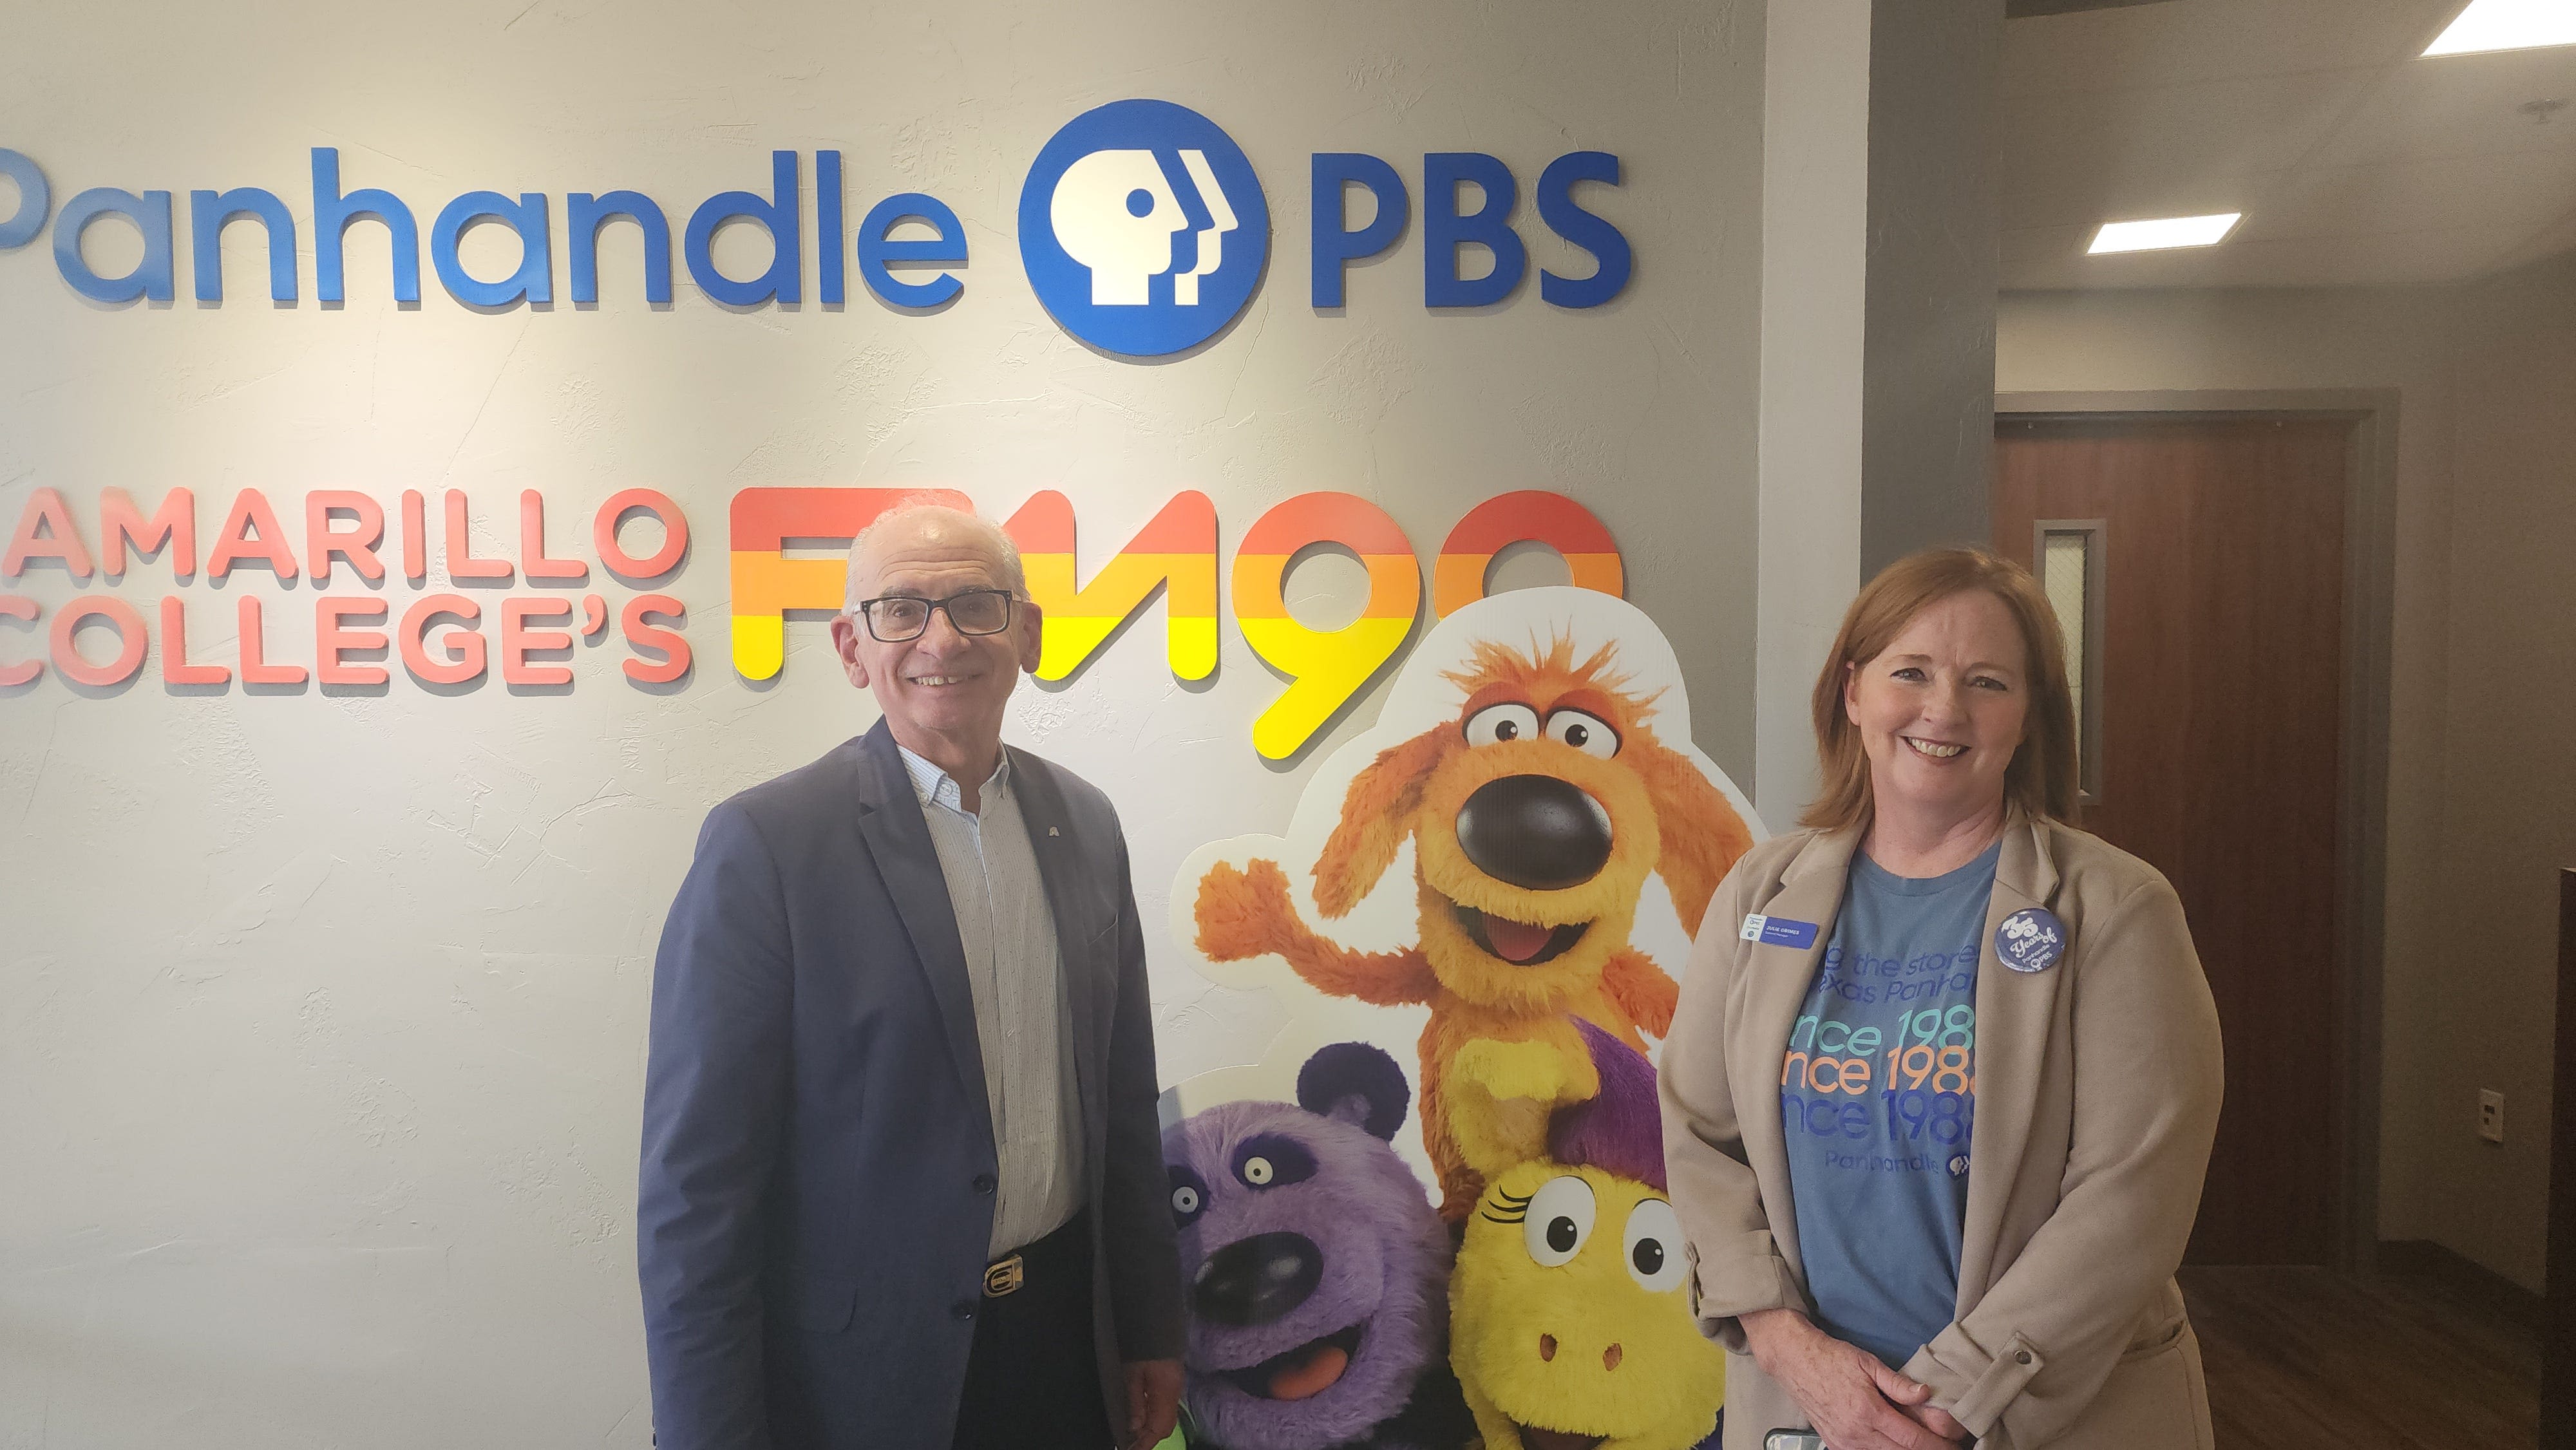 Panhandle PBS celebrates its 35th anniversary with open house